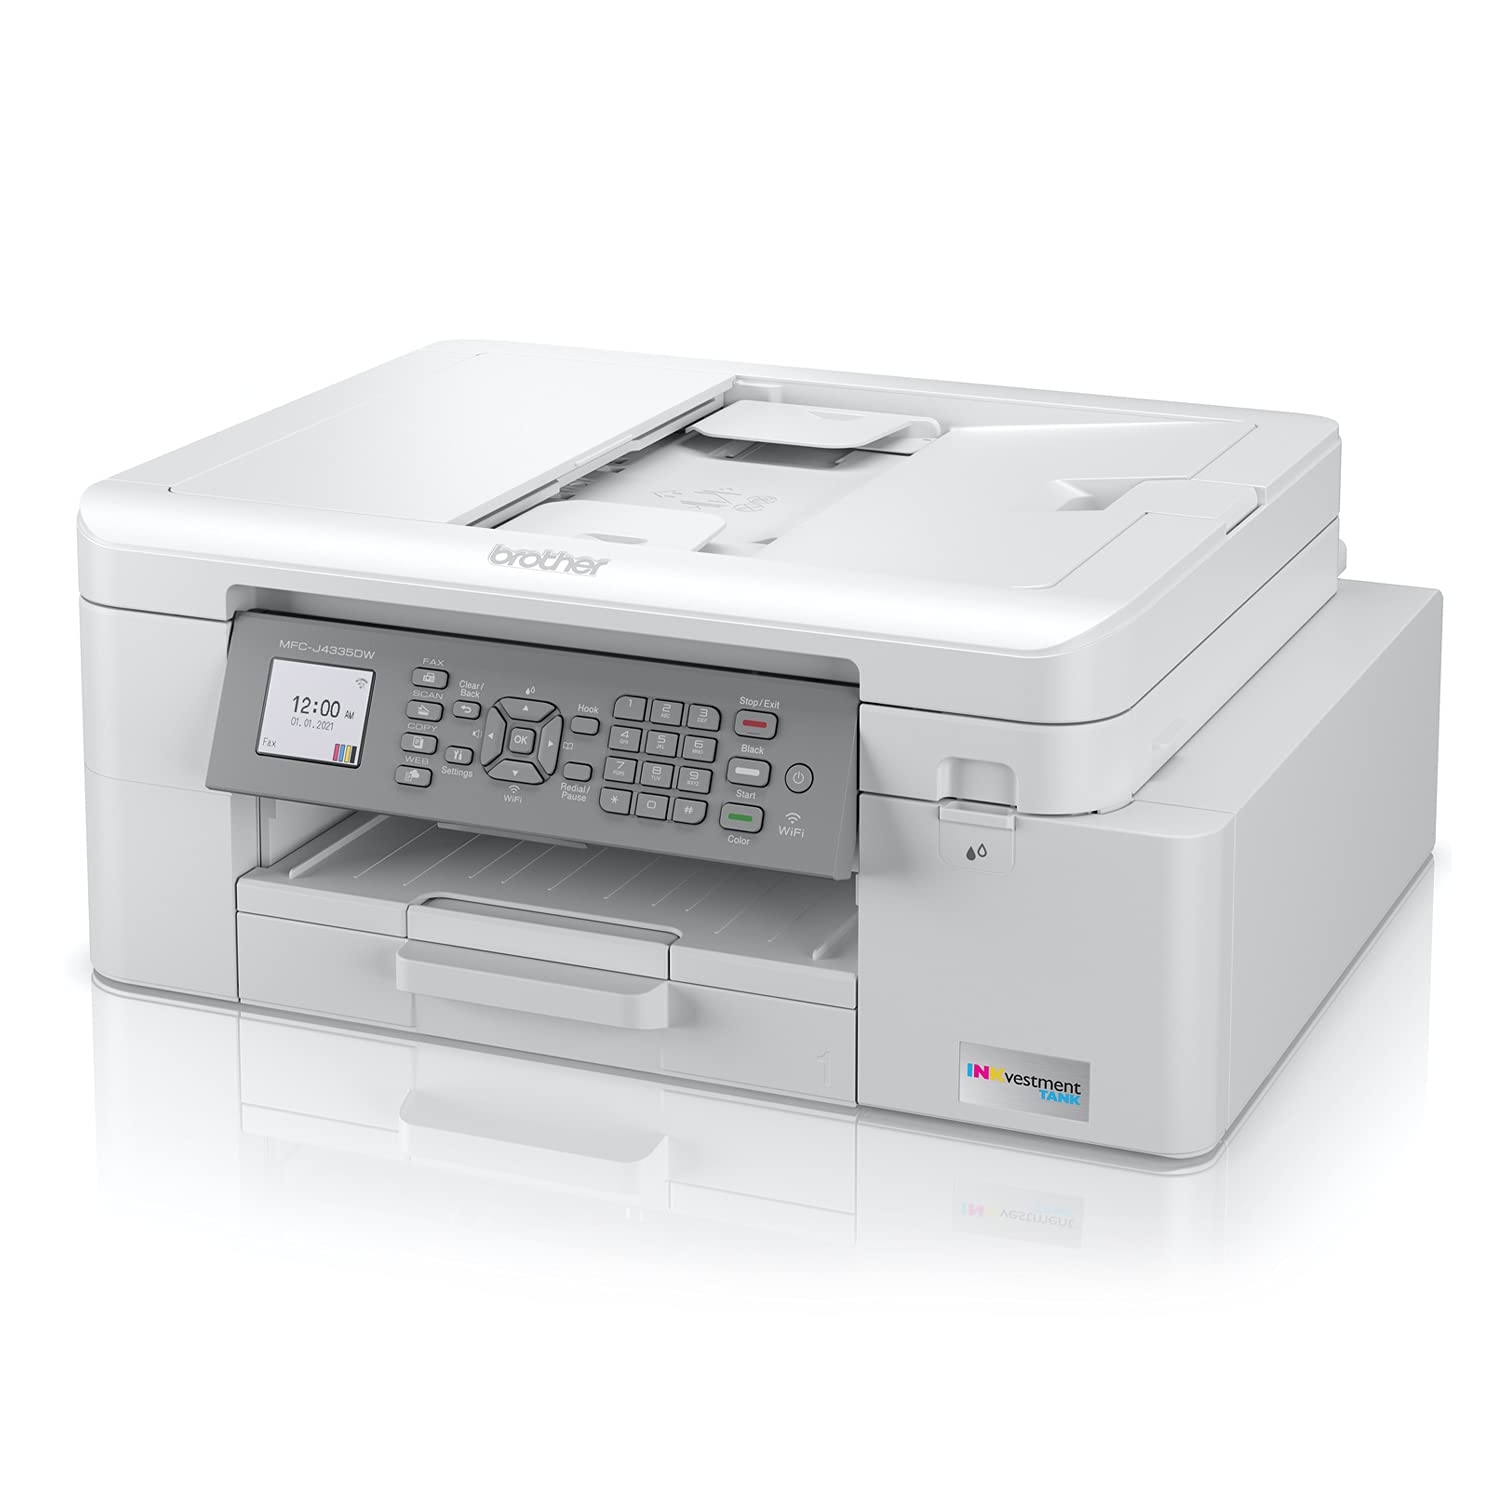 Brother MFC-J4335DW INKvestment-Tank All-in-One Color Printer with Duplex and Wireless Printing Plus Up to 1-Year of Ink in-Box